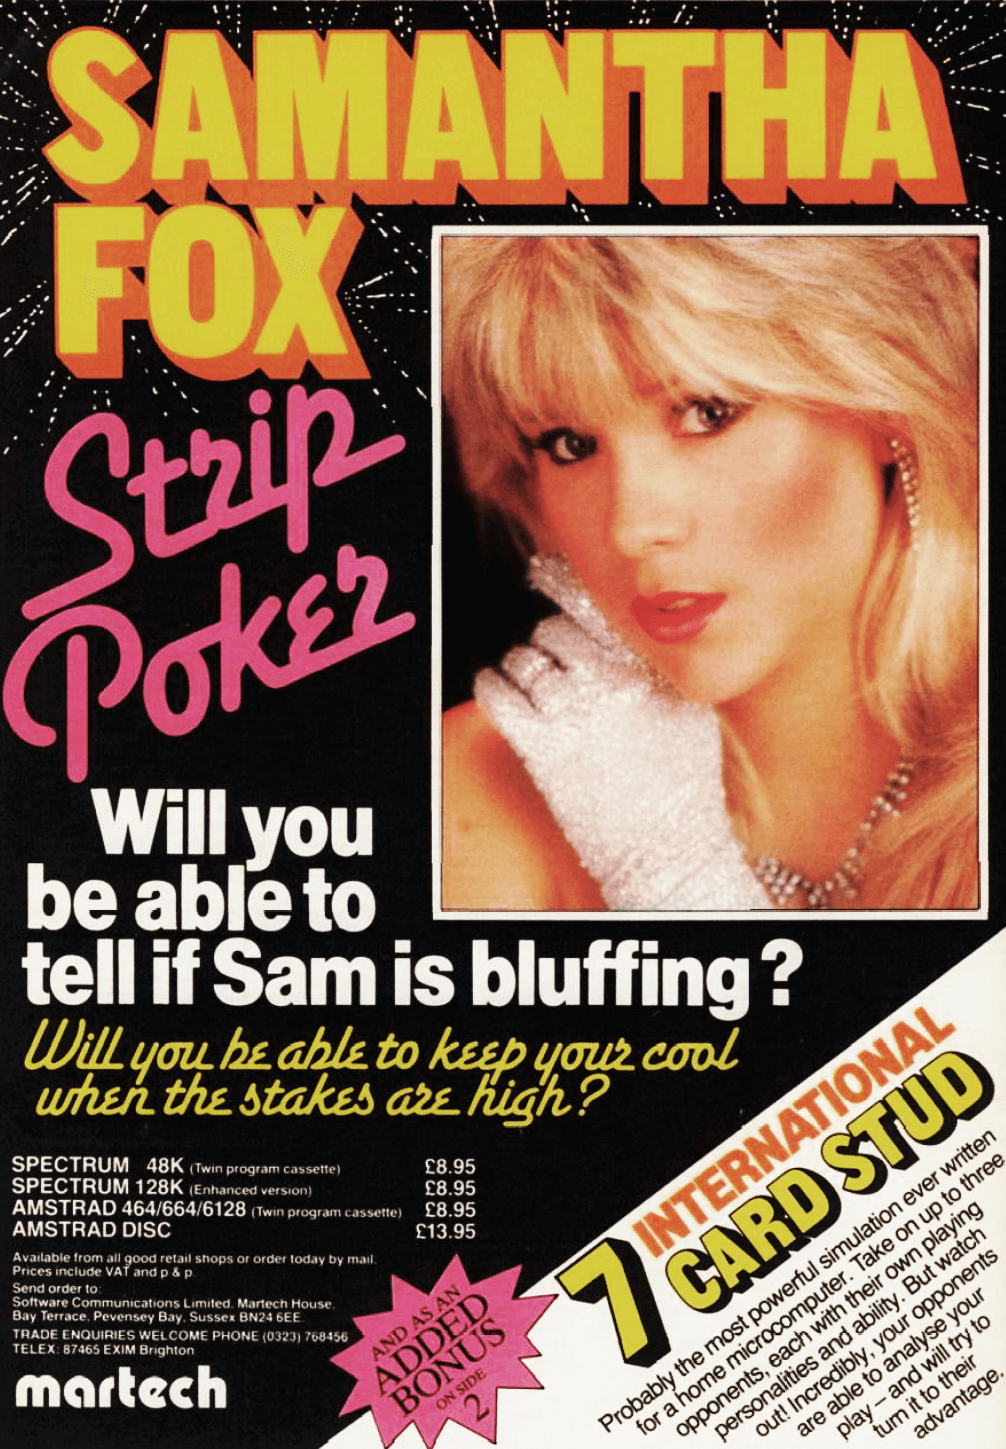 Image For Post | **Description**  
Samantha Fox Strip Poker is a 1986 erotic video game developed by Software Communications and published by Martech Games. It was published on the Commodore 64, Amstrad CPC, BBC Micro, MSX, and ZX Spectrum. 



**Production**  
The game was one of the first erotic video games to include a real human being. It is part of a theme of erotic games where players complete difficult tasks and are rewarded with nudity.

The video game was programmed by Wolfgang Smith, with the graphics edited by Malcolm Smith. The author of the music is Rob Hubbard , credited with the name John York. The music includes a cover of The Entertainer by Scott Joplin and The Stripper by David Rose. 



**Gameplay**  
The players plays 5-card or 7-card stud poker against British model and singer Samantha Fox. Beating her results in her taking off her clothes until she is topless. 



**Music**  
Although the music is credited to John York in the game, many years later C64 SID Legend Rob Hubbard admitted in an interview that he did it.

    "Samantha Fox Strip Poker was such a cheesy title and they wanted that cheesy lame music along with it (covers of "The Entertainer" by Scott Joplin and "The Stripper" by David Rose). I didn't want to admit that I did it just for the money. John York was the first name that I thought of and used as an alias."